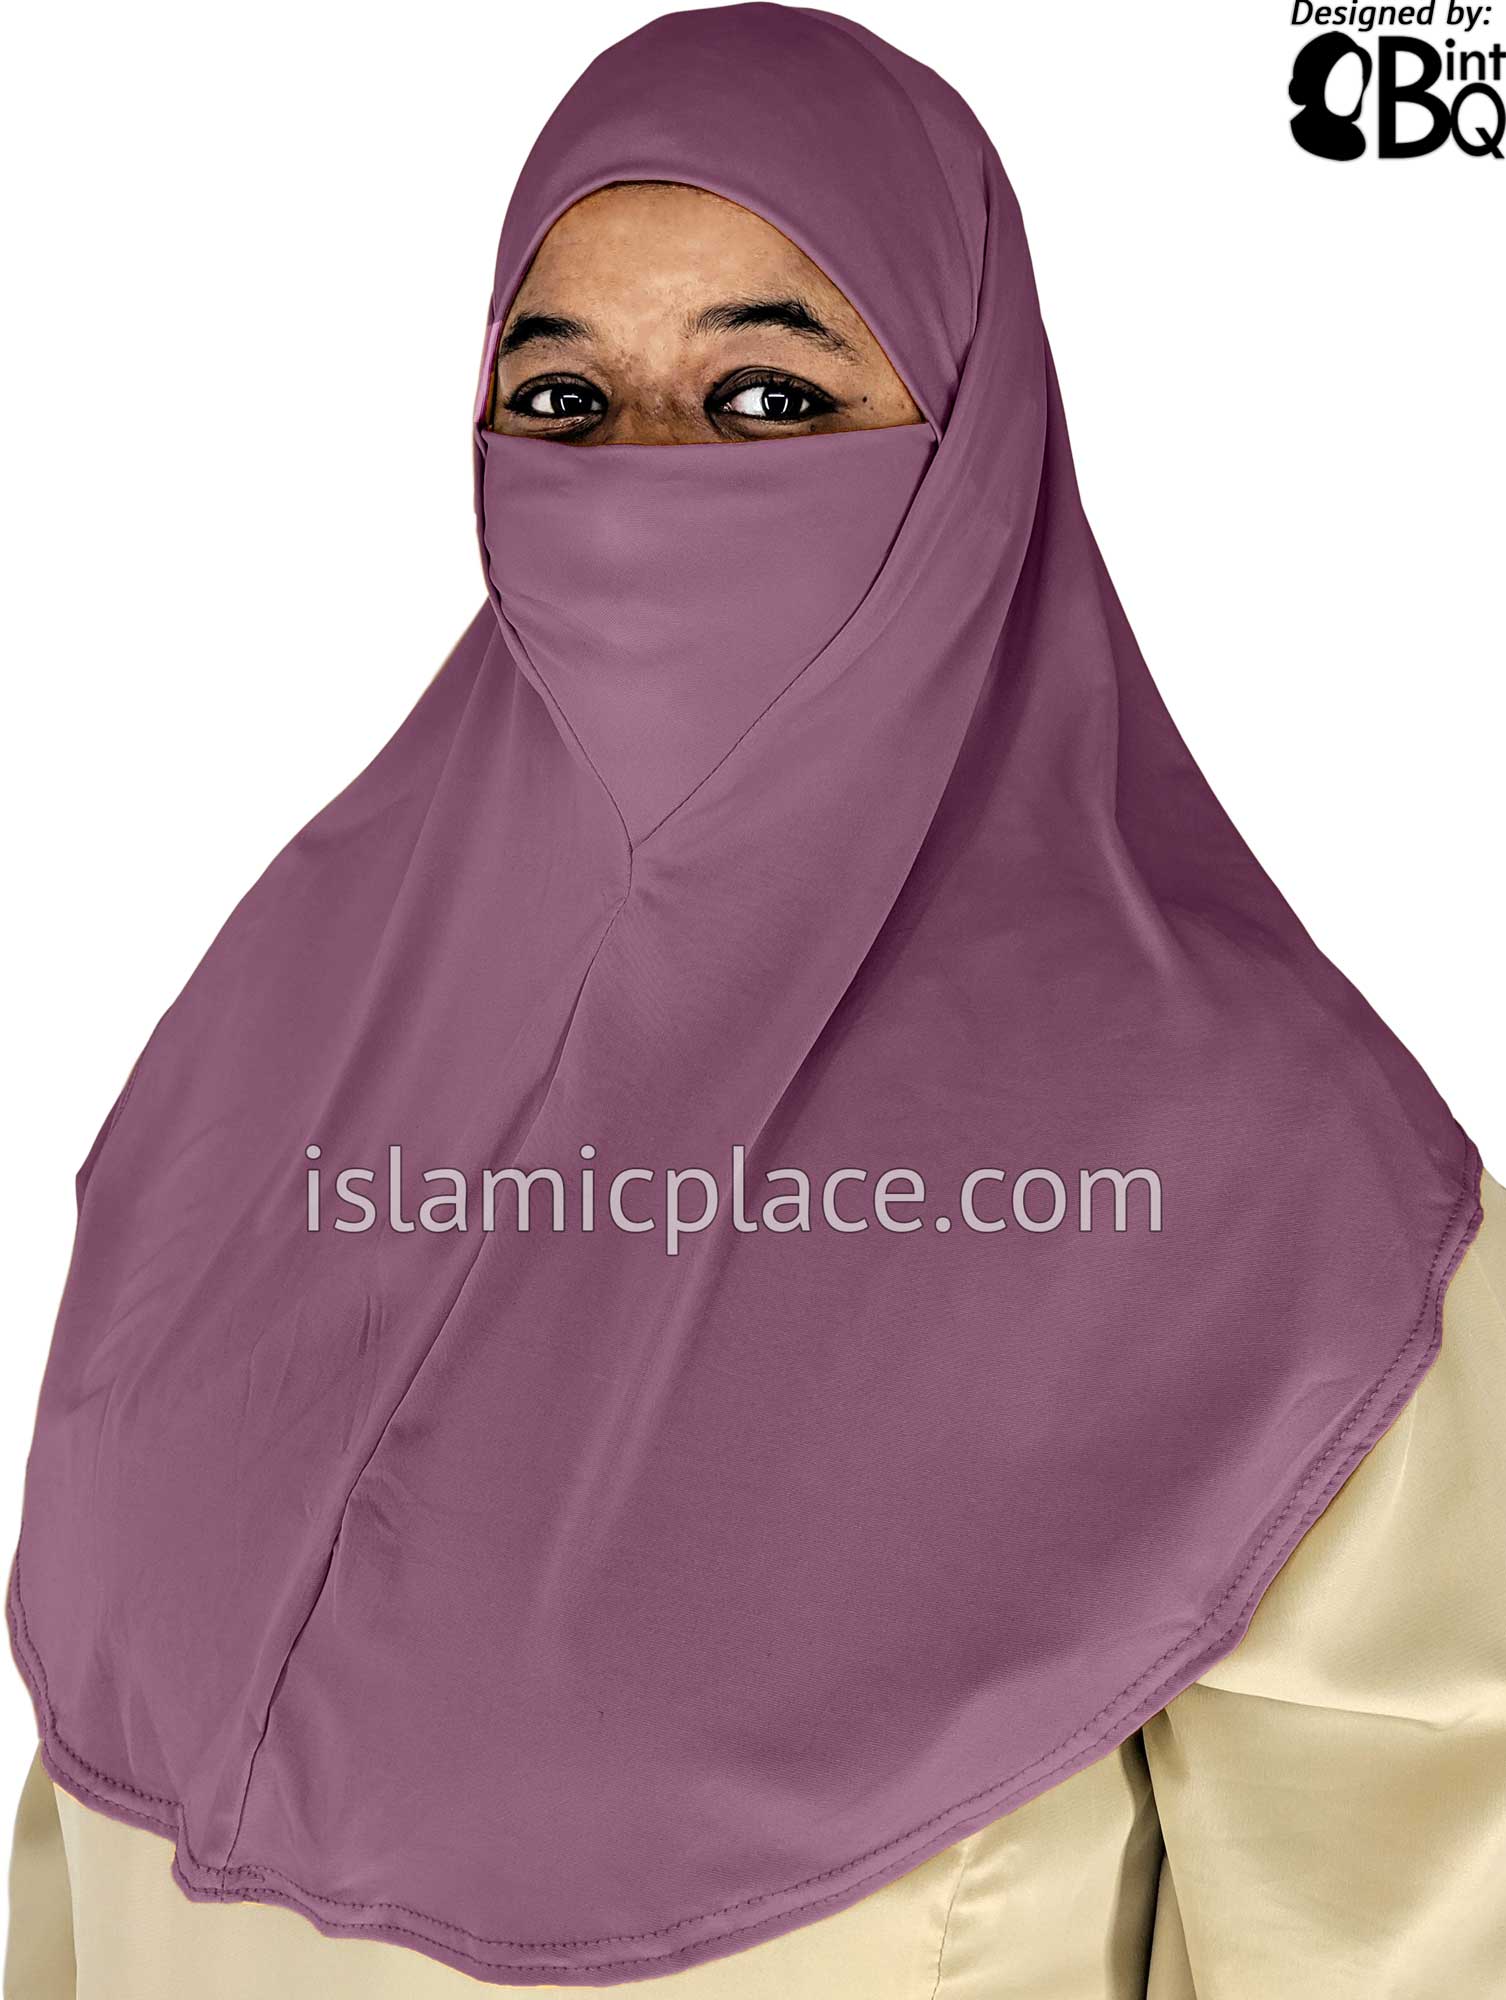 Light Plum - Plain Teen to Adult (Large) Hijab Al-Amira with Built-in Niqab